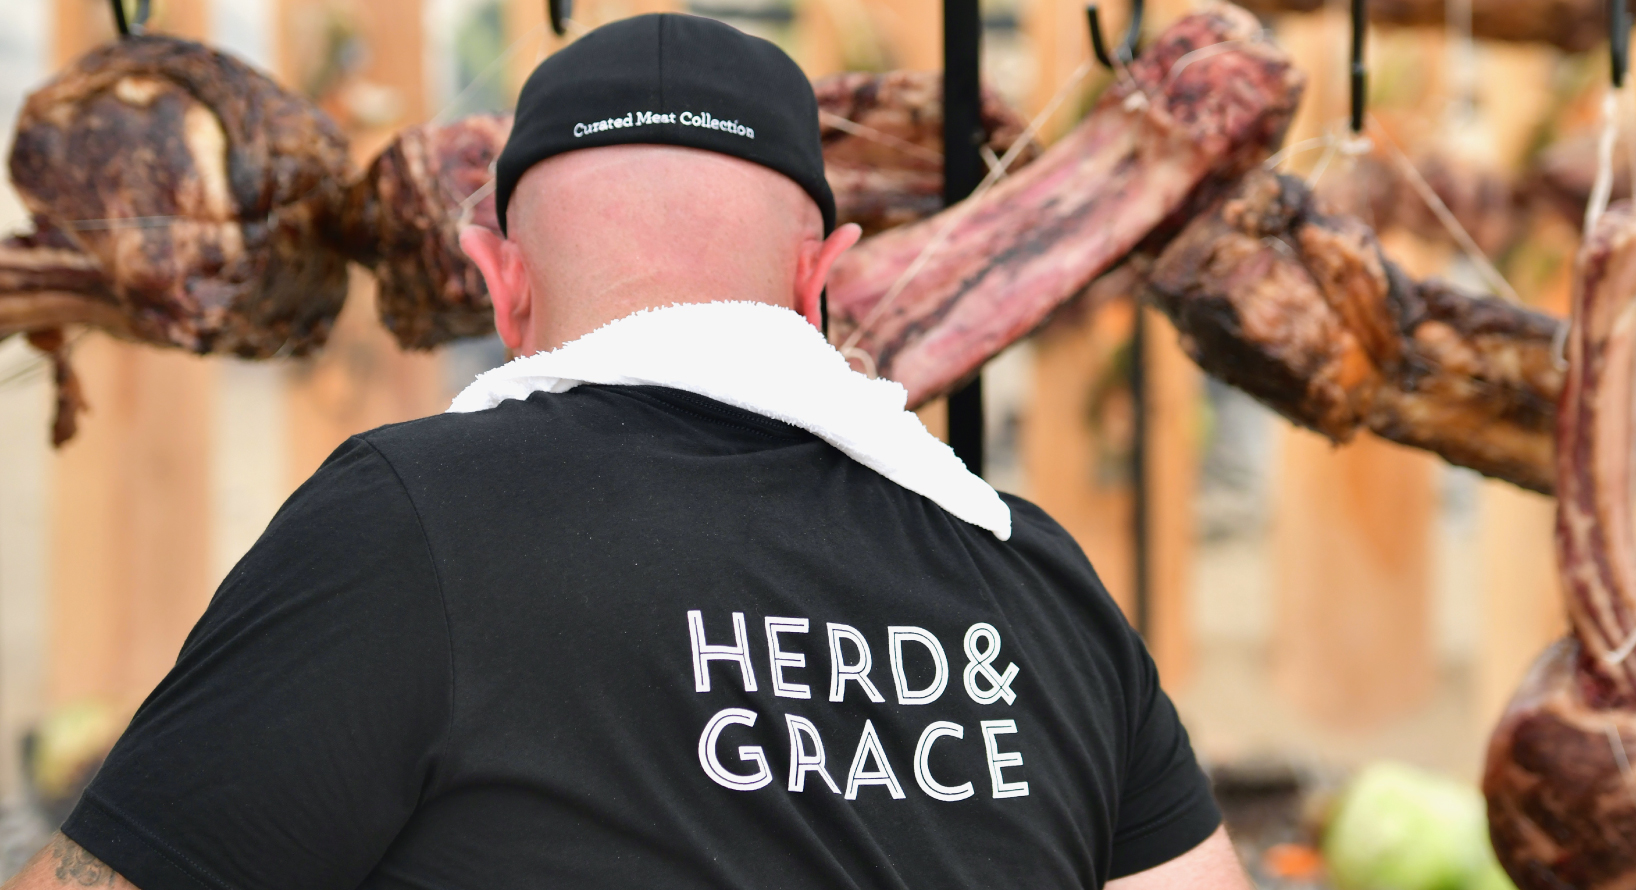 Herd & Grace Branded Tshirt and Cap worn by local butcher